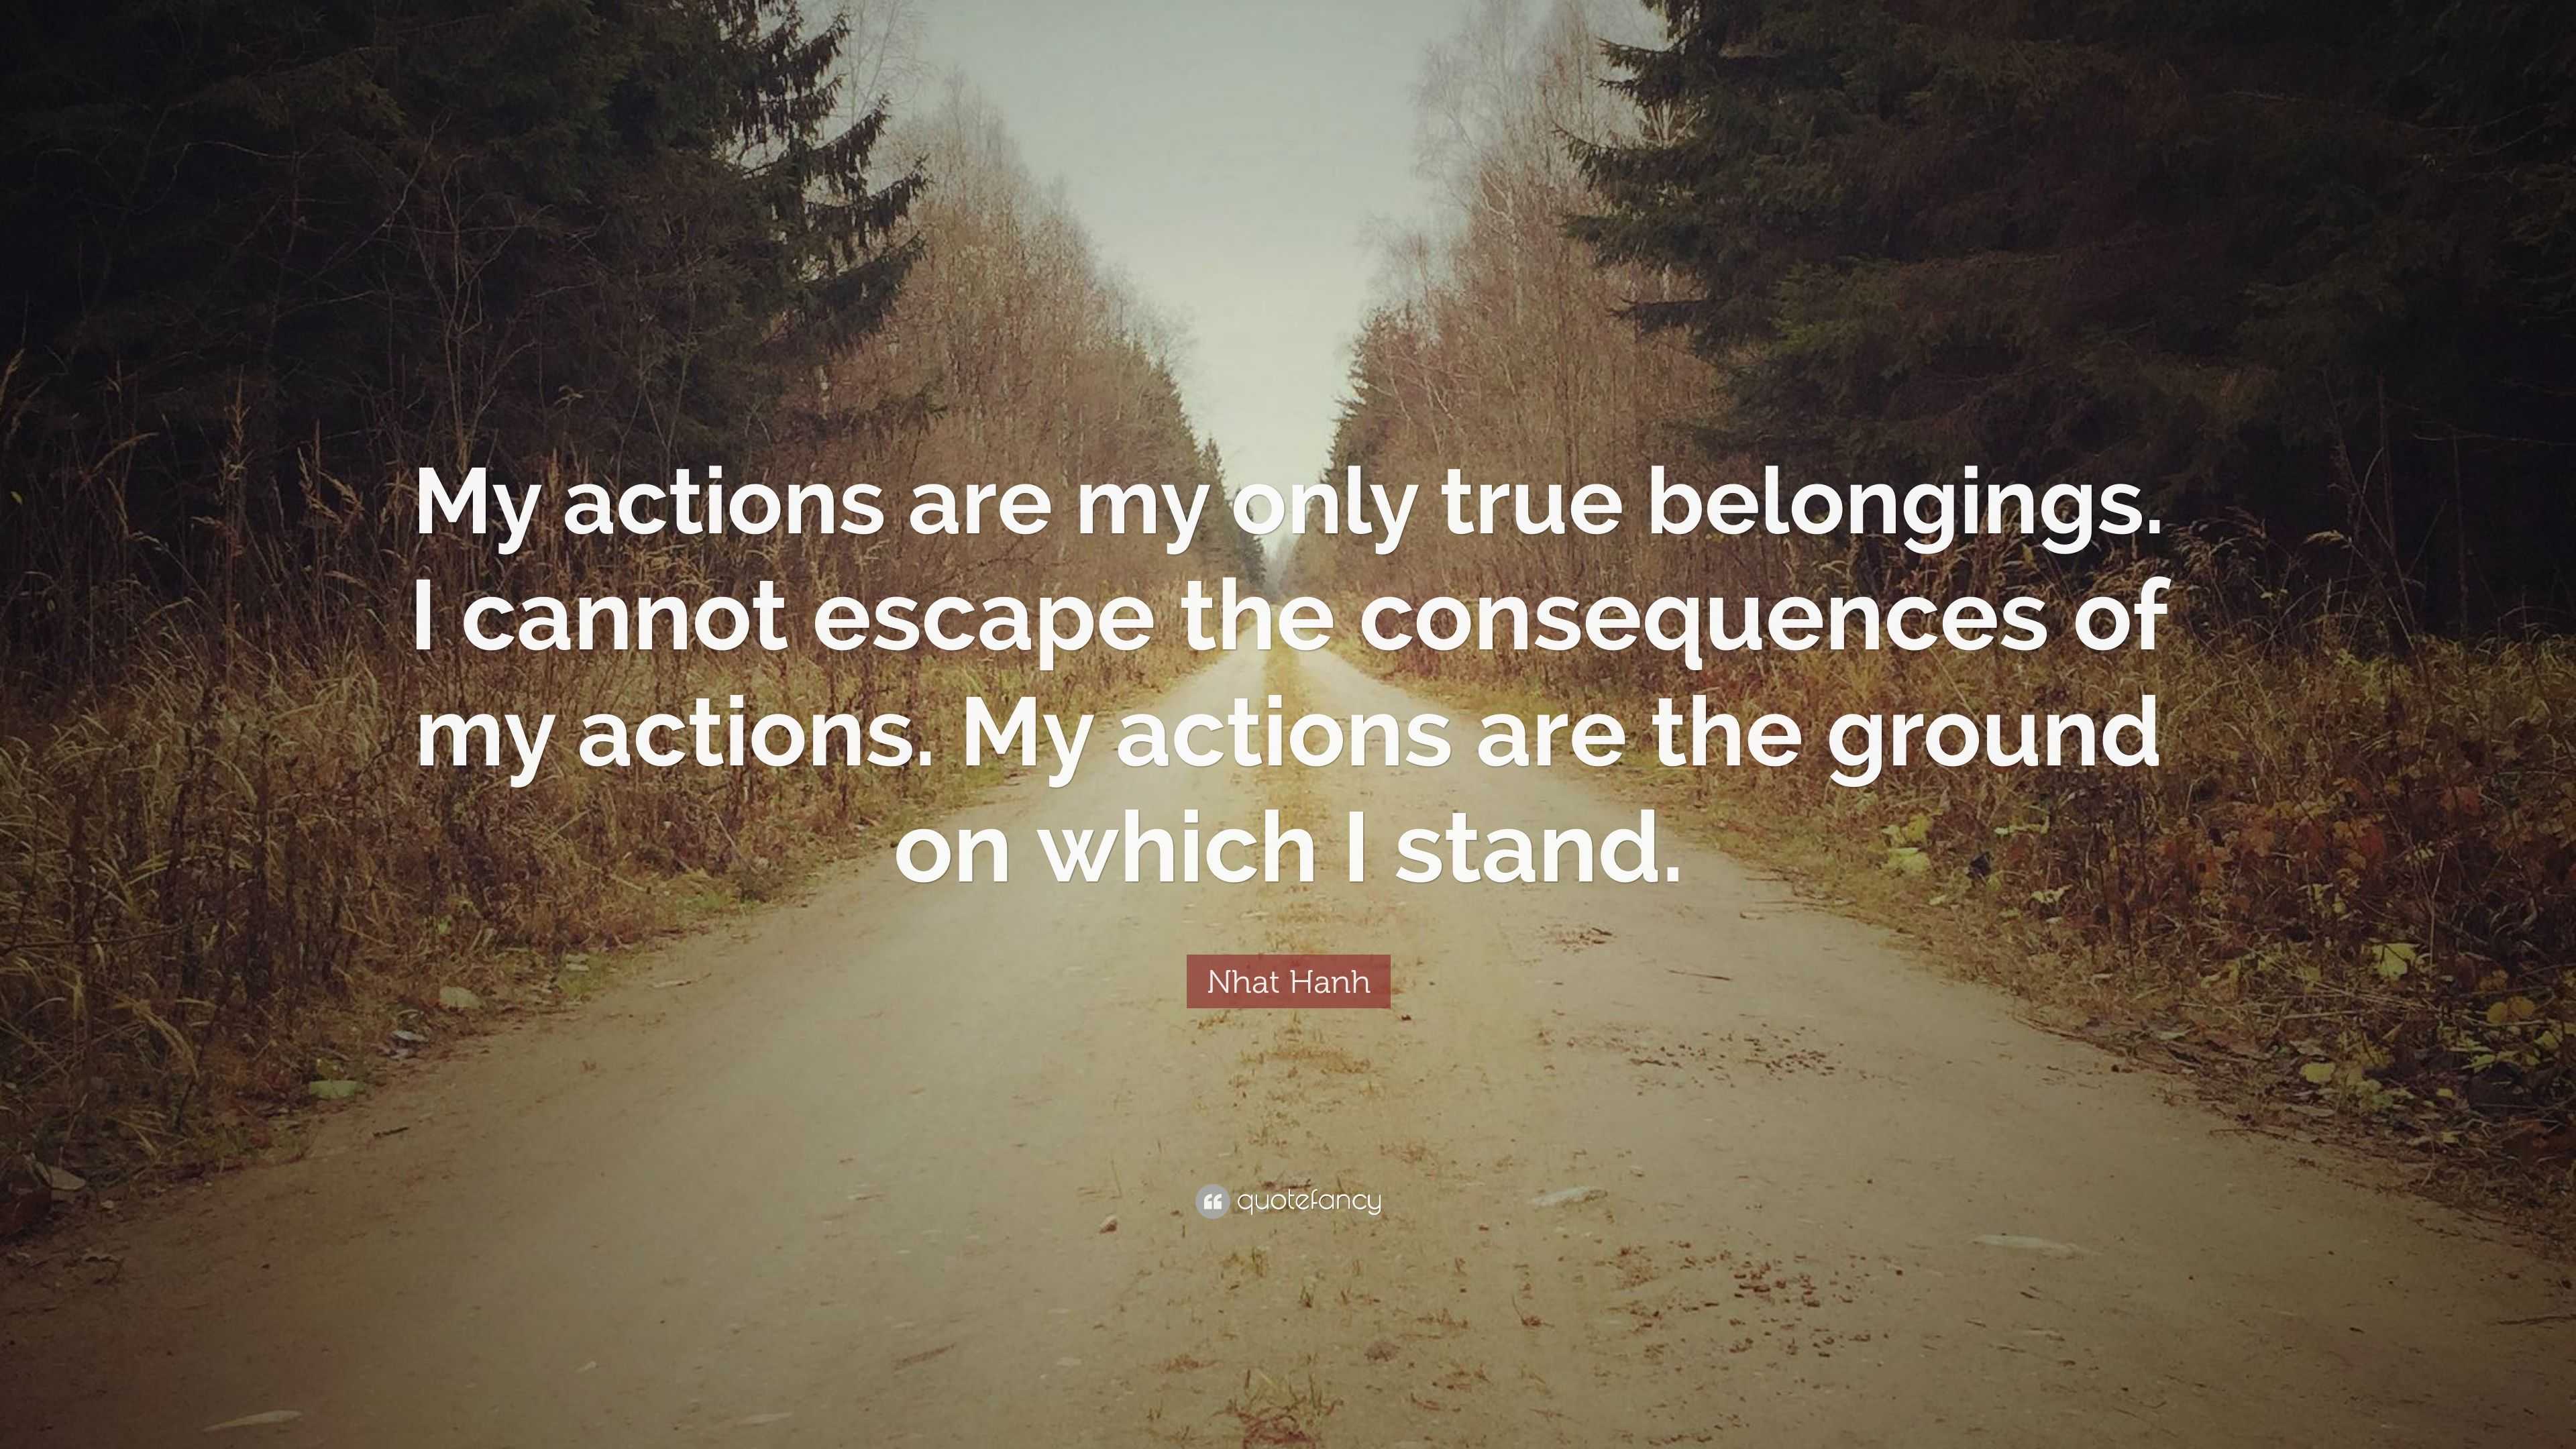 Nhat Hanh Quote: “My actions are my only true belongings. I cannot ...